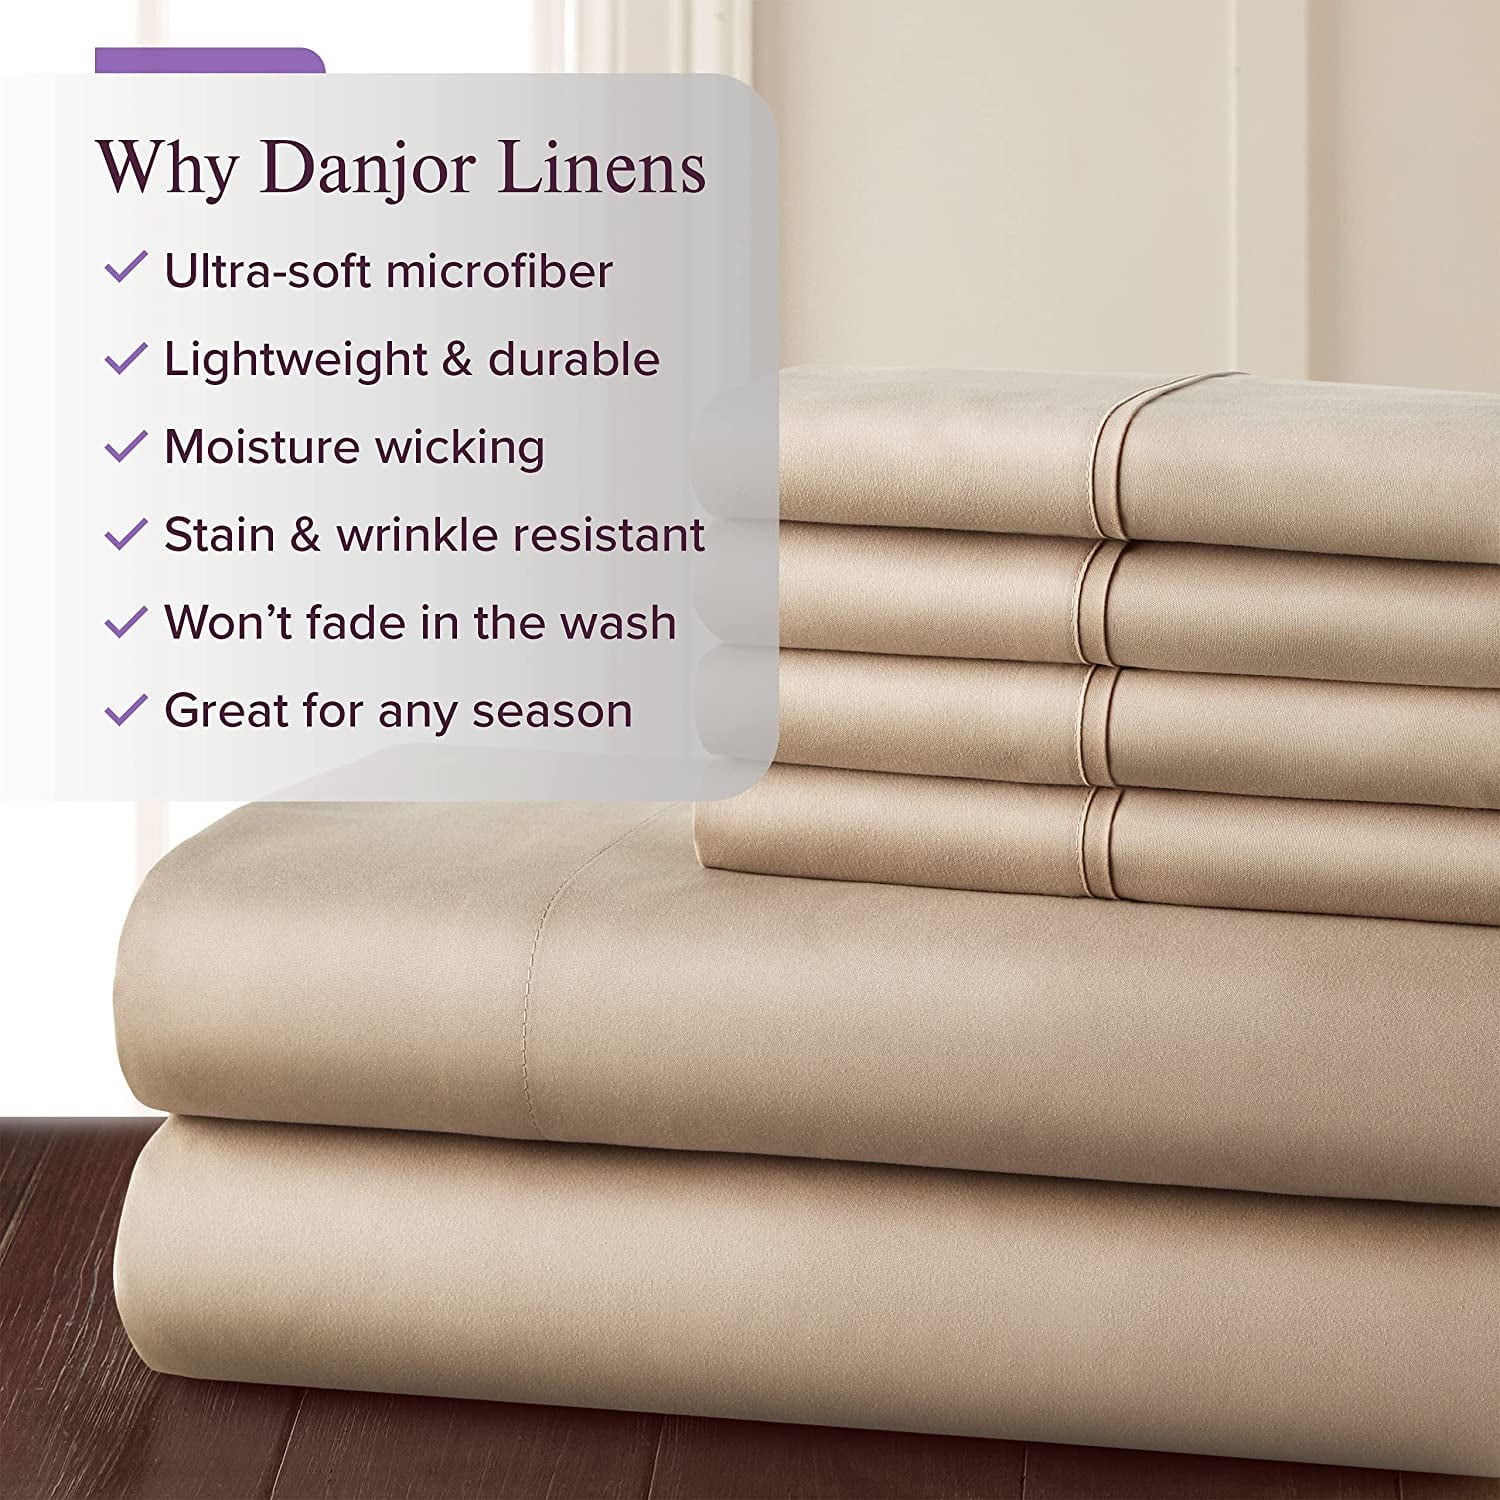 Danjor Linens Bed Sheets Set, HOTEL LUXURY 1800 Series Platinum  CollectionBeddingSetQueenWhiteY0728 - Bed Sheets & Pillowcases